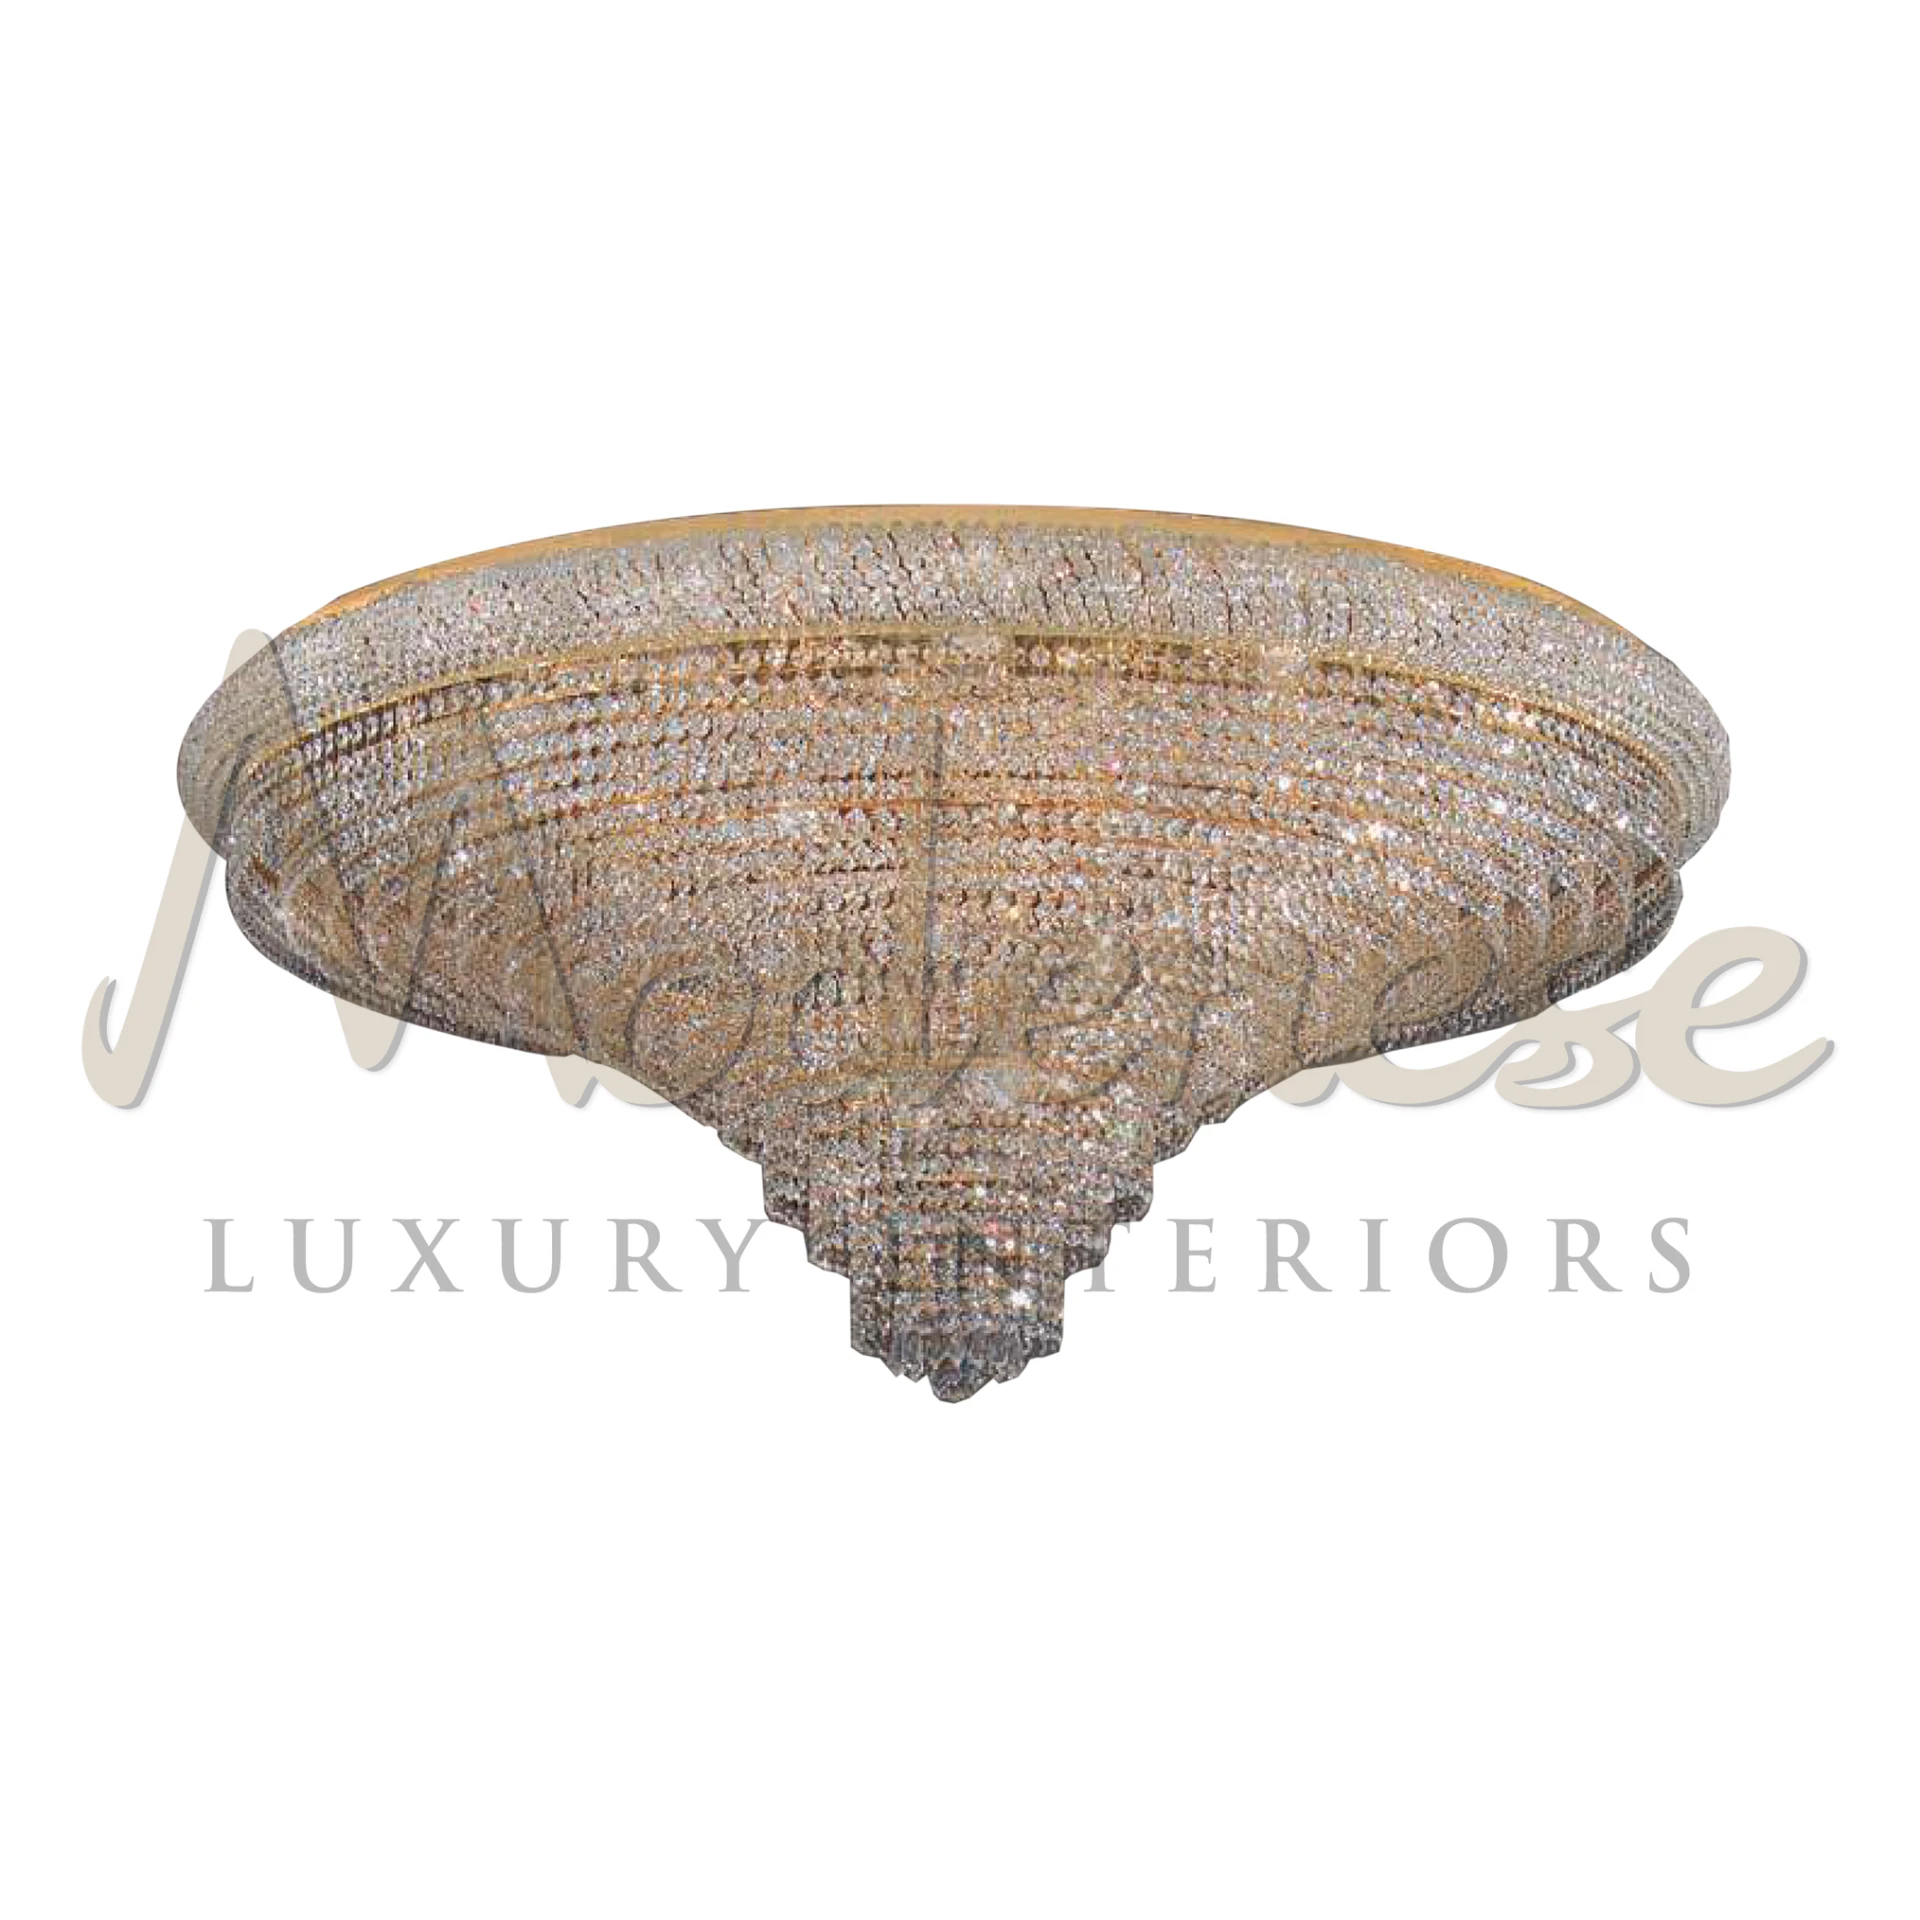 Glamorous Sophisticated Ceiling Lamp with dense crystal decoration and a golden shade.